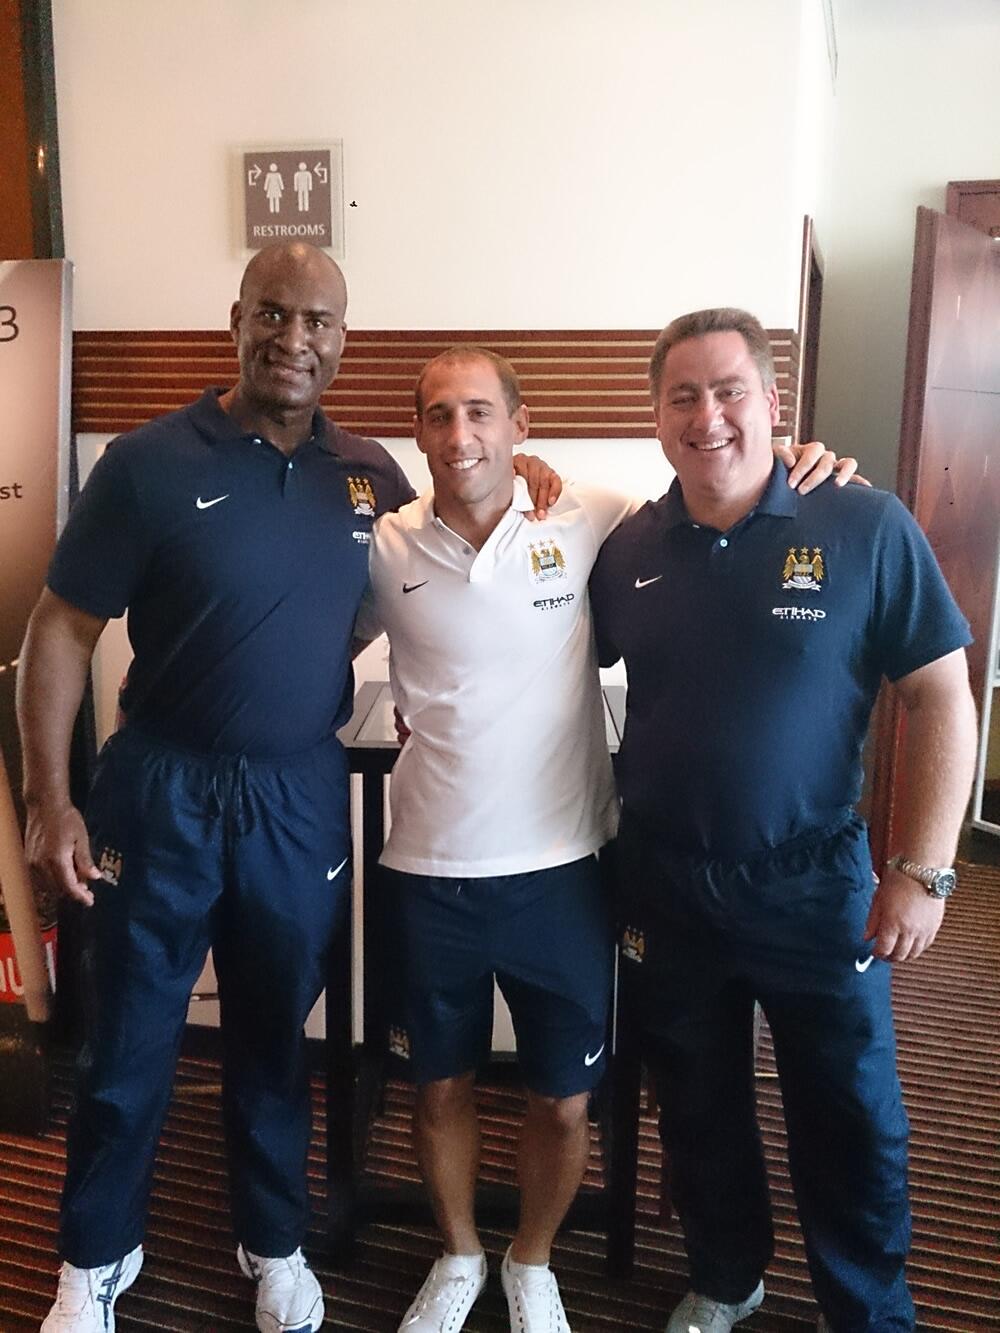 Zuigeling glans commentator Manchester City on Twitter: "BODYGUARDS: @Pablo_Zabaleta with the #MCFC  team's security Junior and Simon. Top blokes! #cityontour  http://t.co/YQI9Q8wjlZ" / Twitter